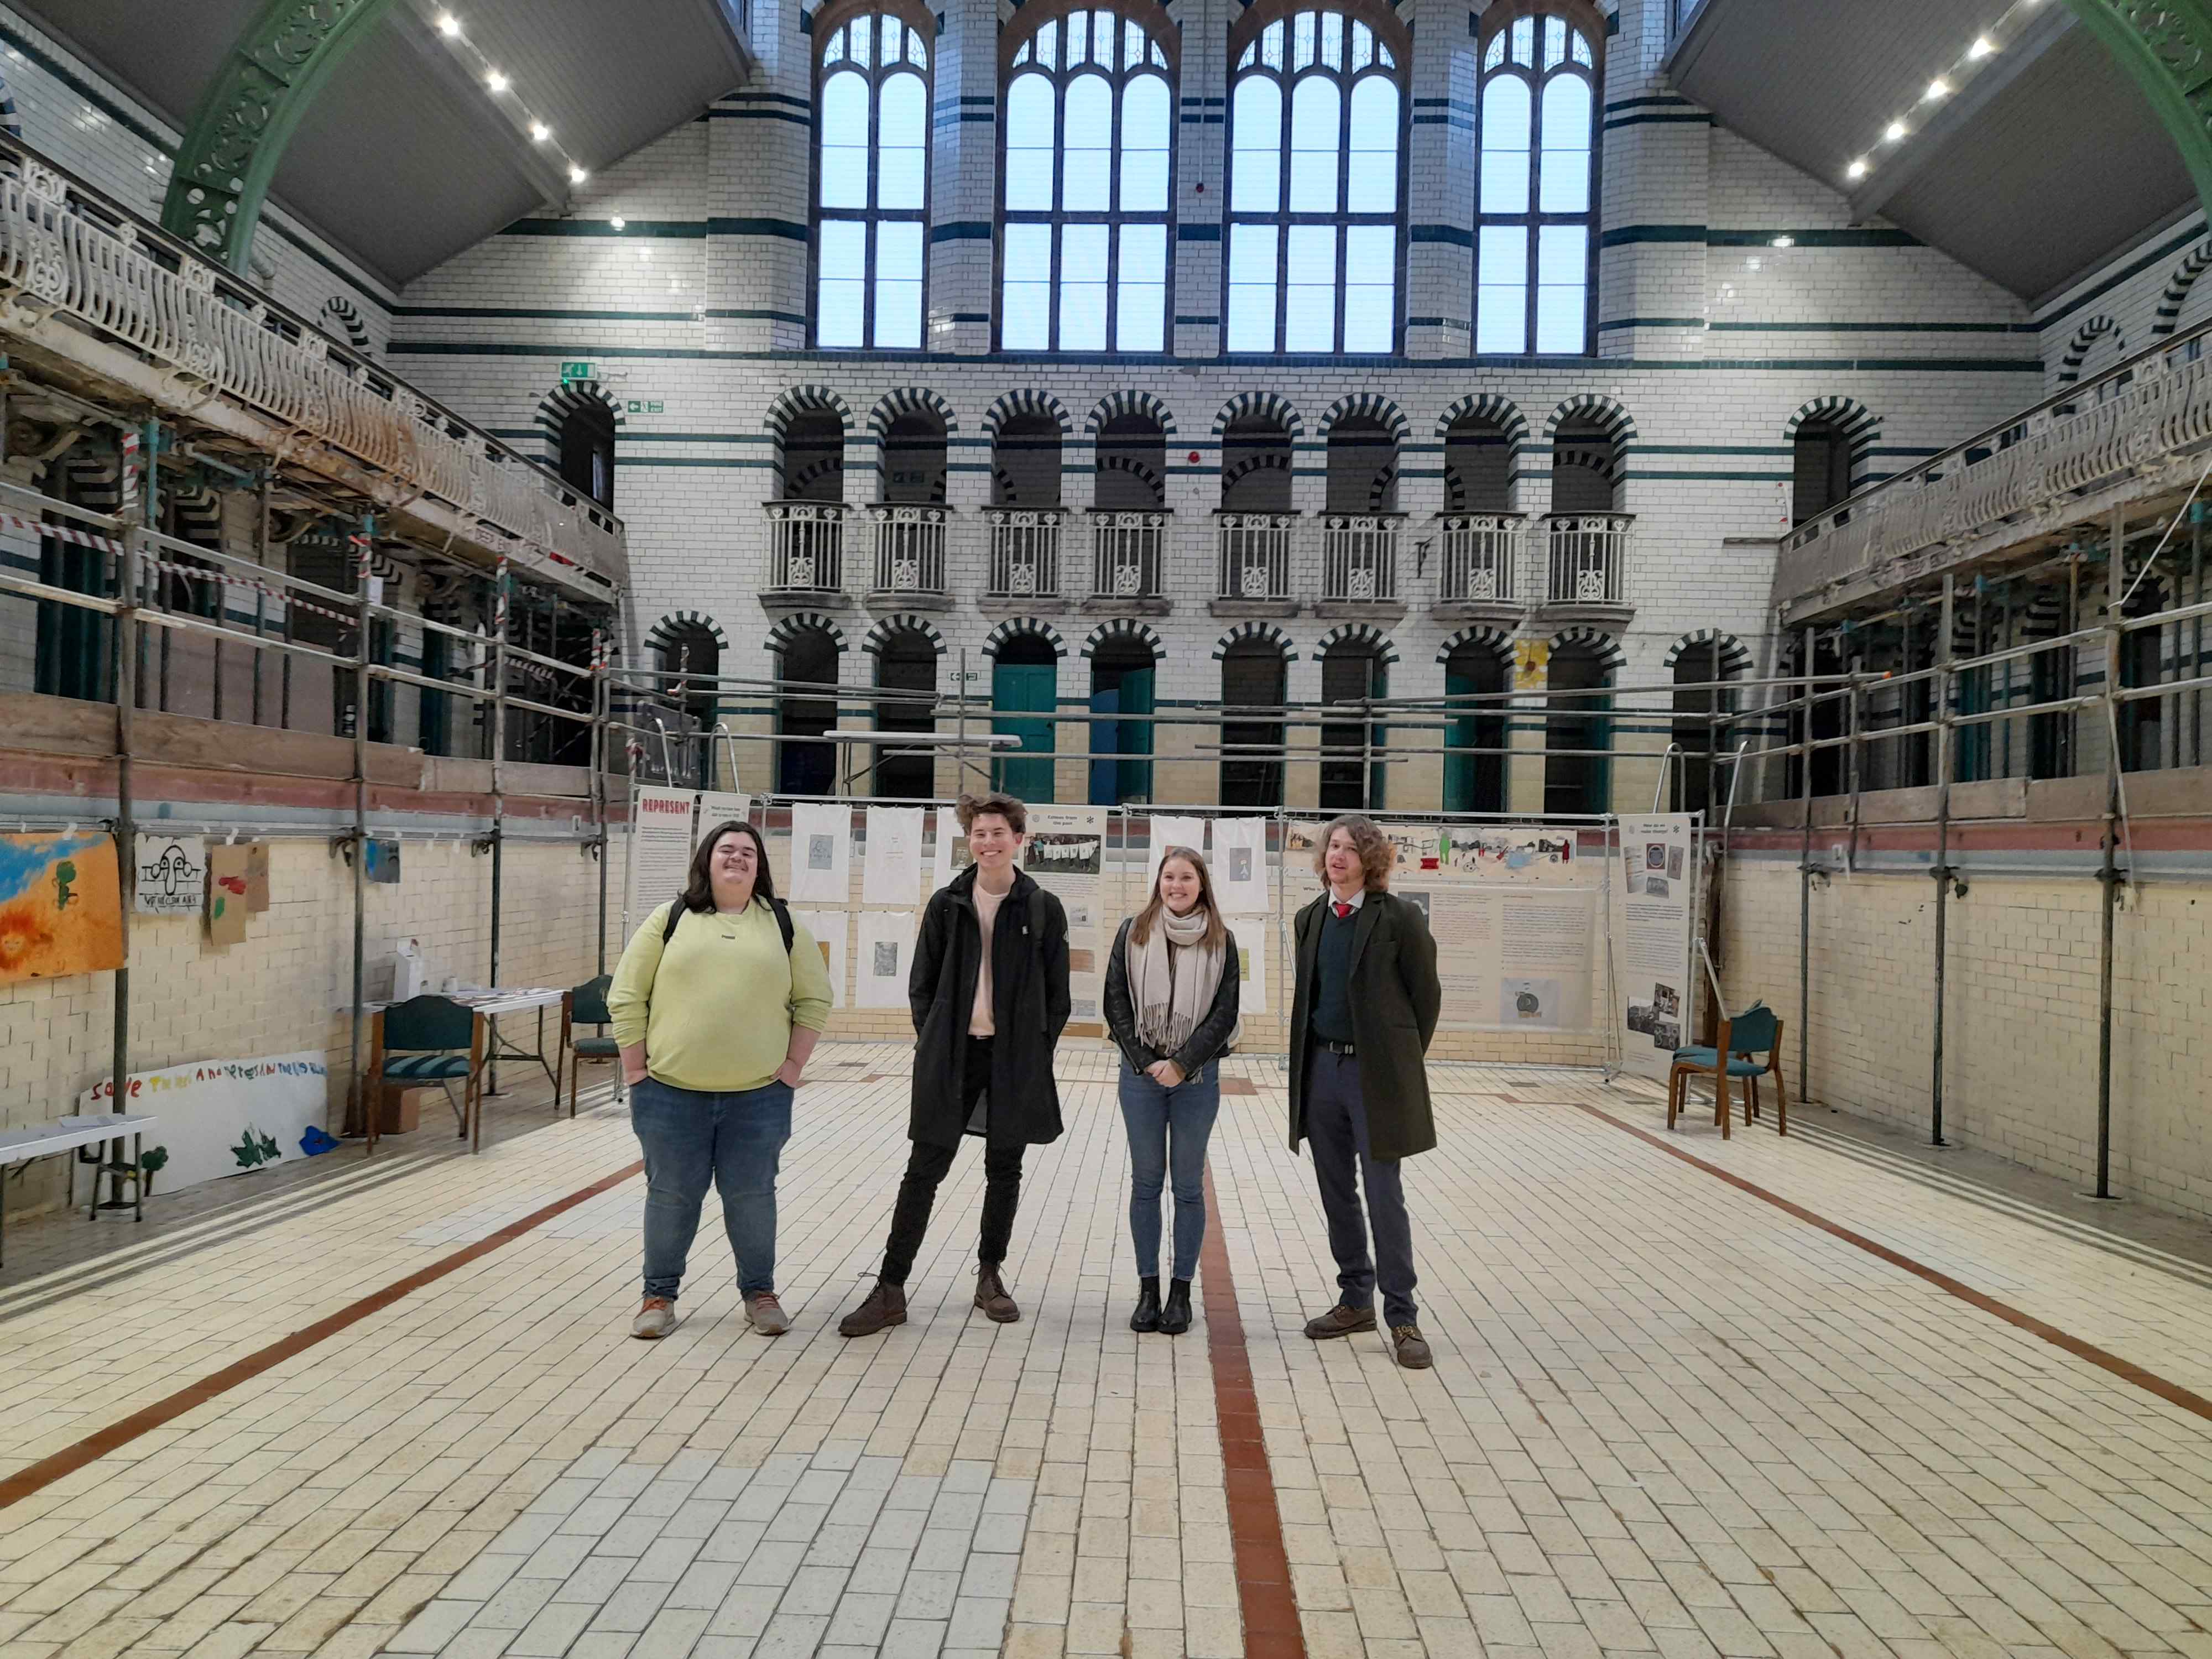 A group of young people standing in the dry pool of a historic Victorian municipal baths building.